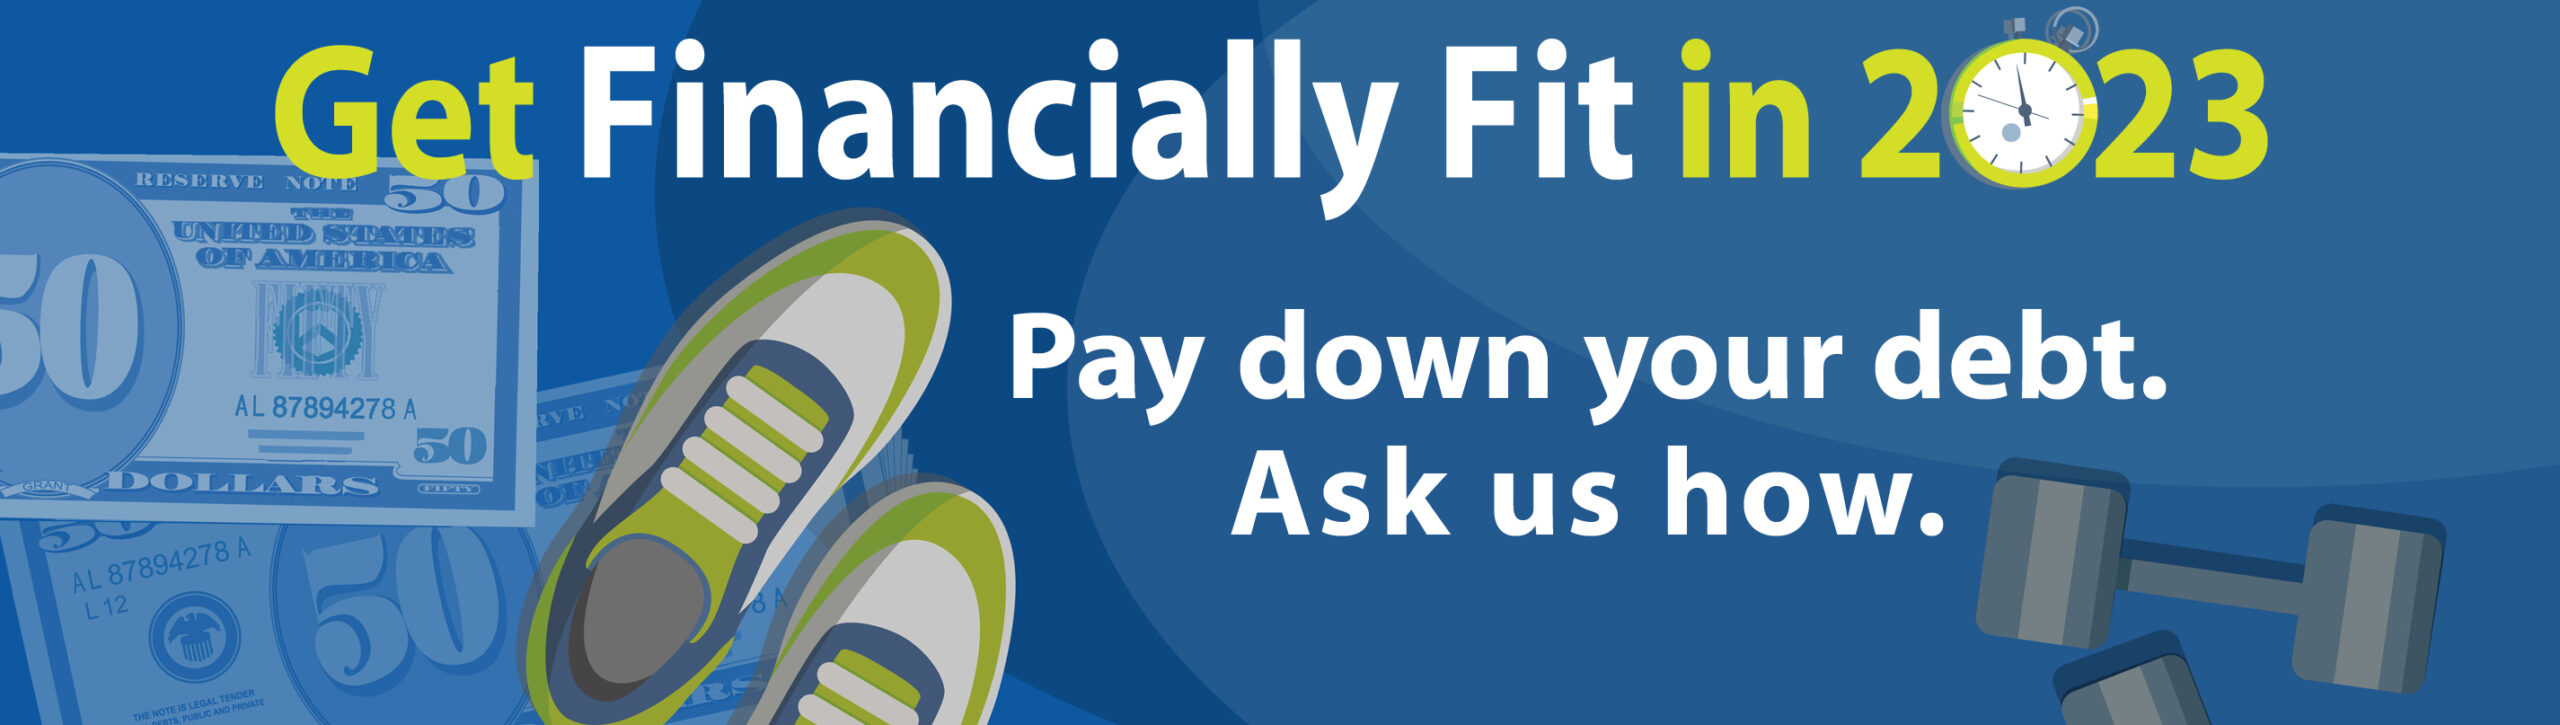 Get Financially Fit in 2023. Pay down your debt. Ask us how.